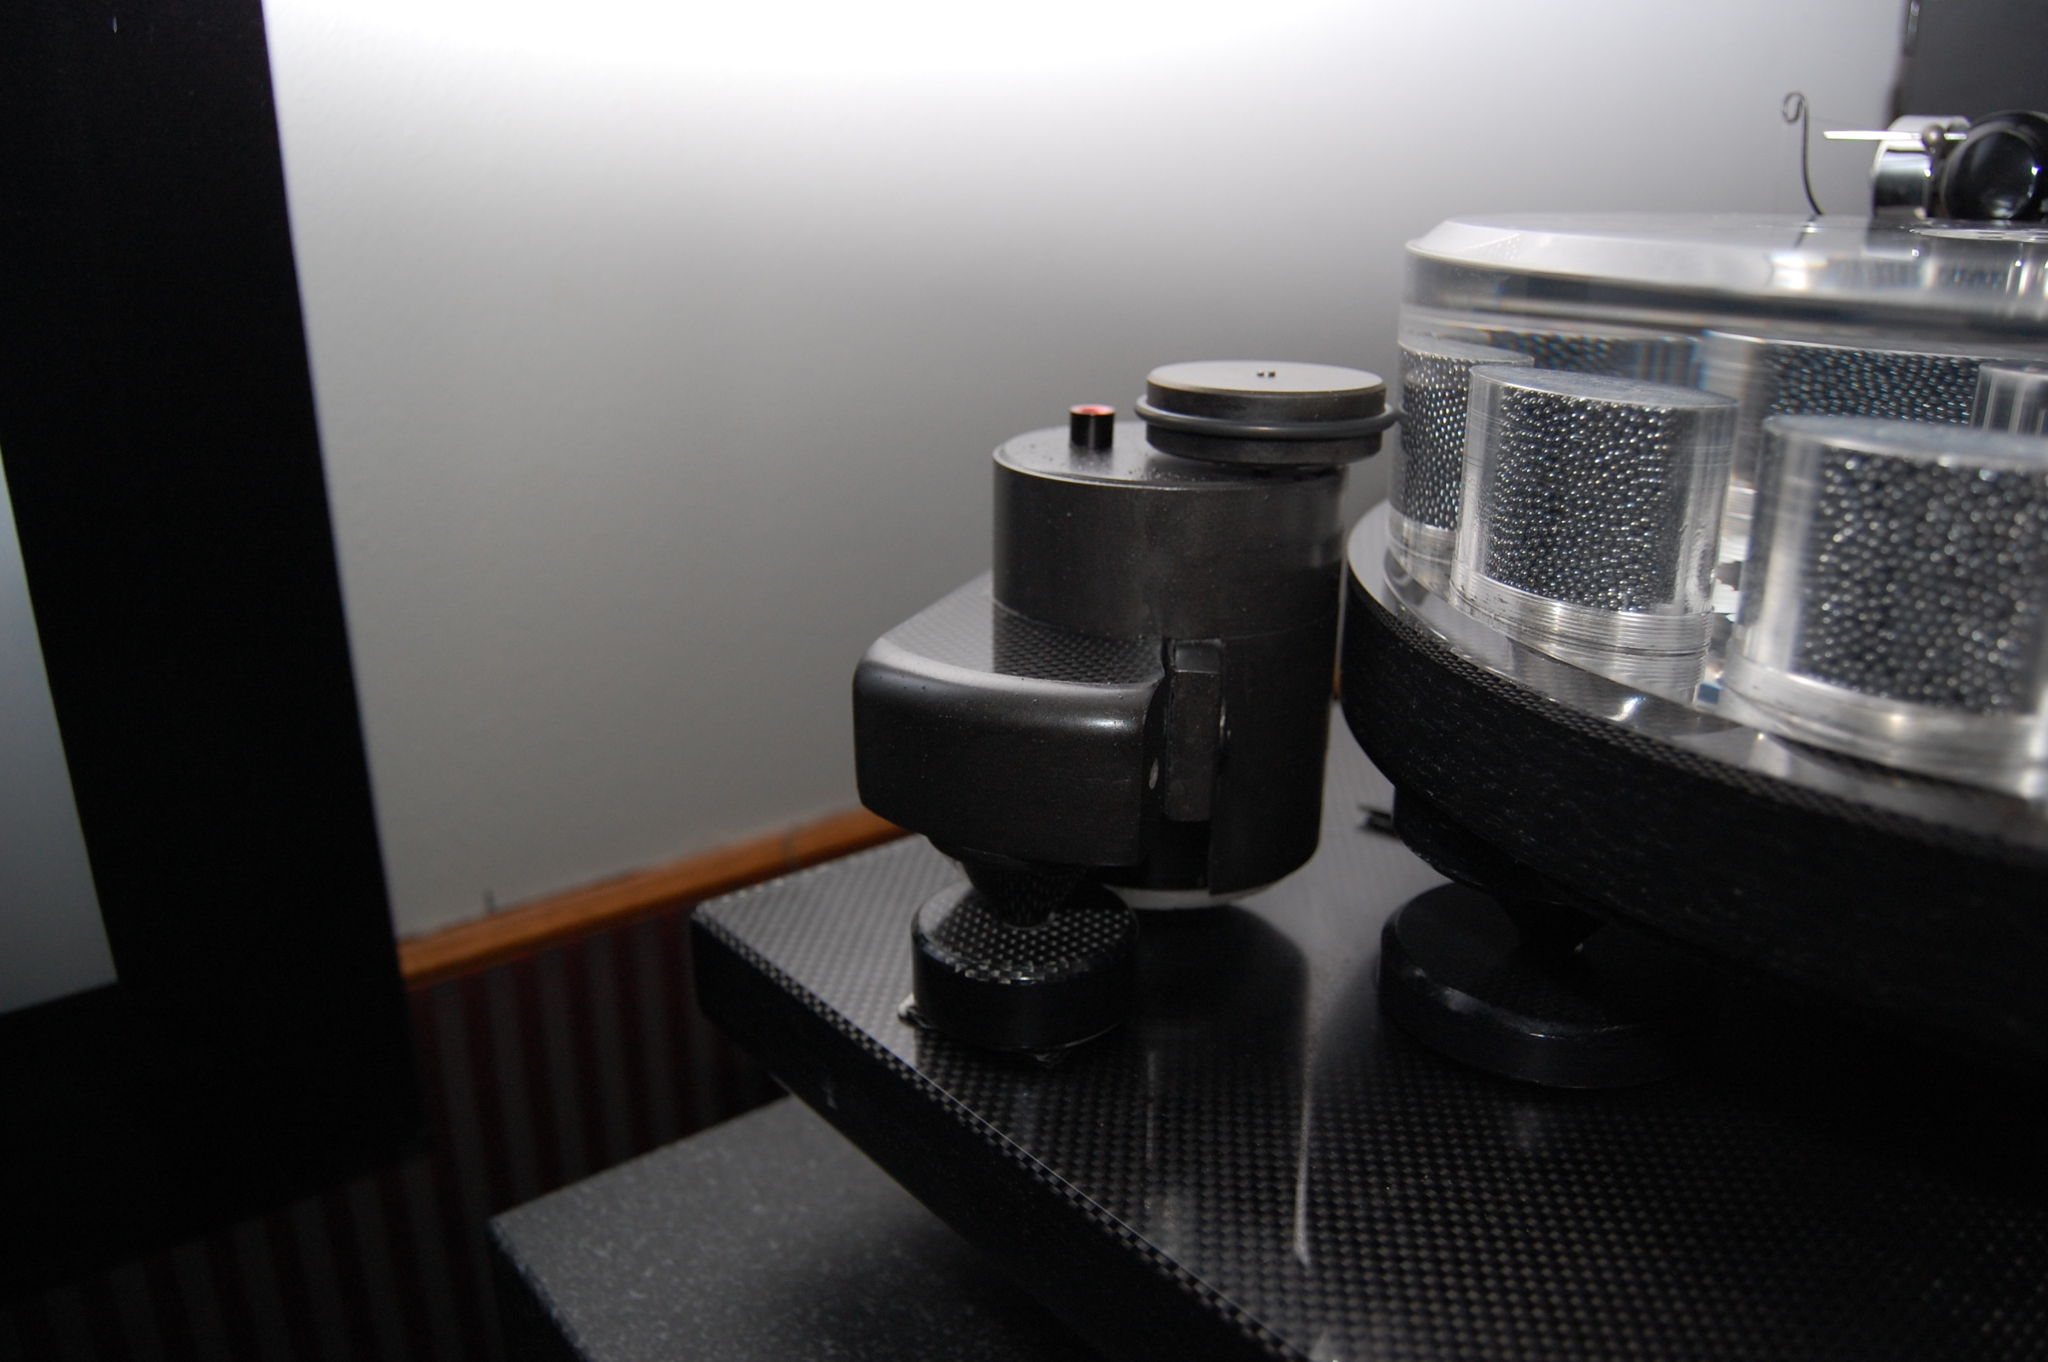 Teres Verus Motor with Millercarbon modified mount